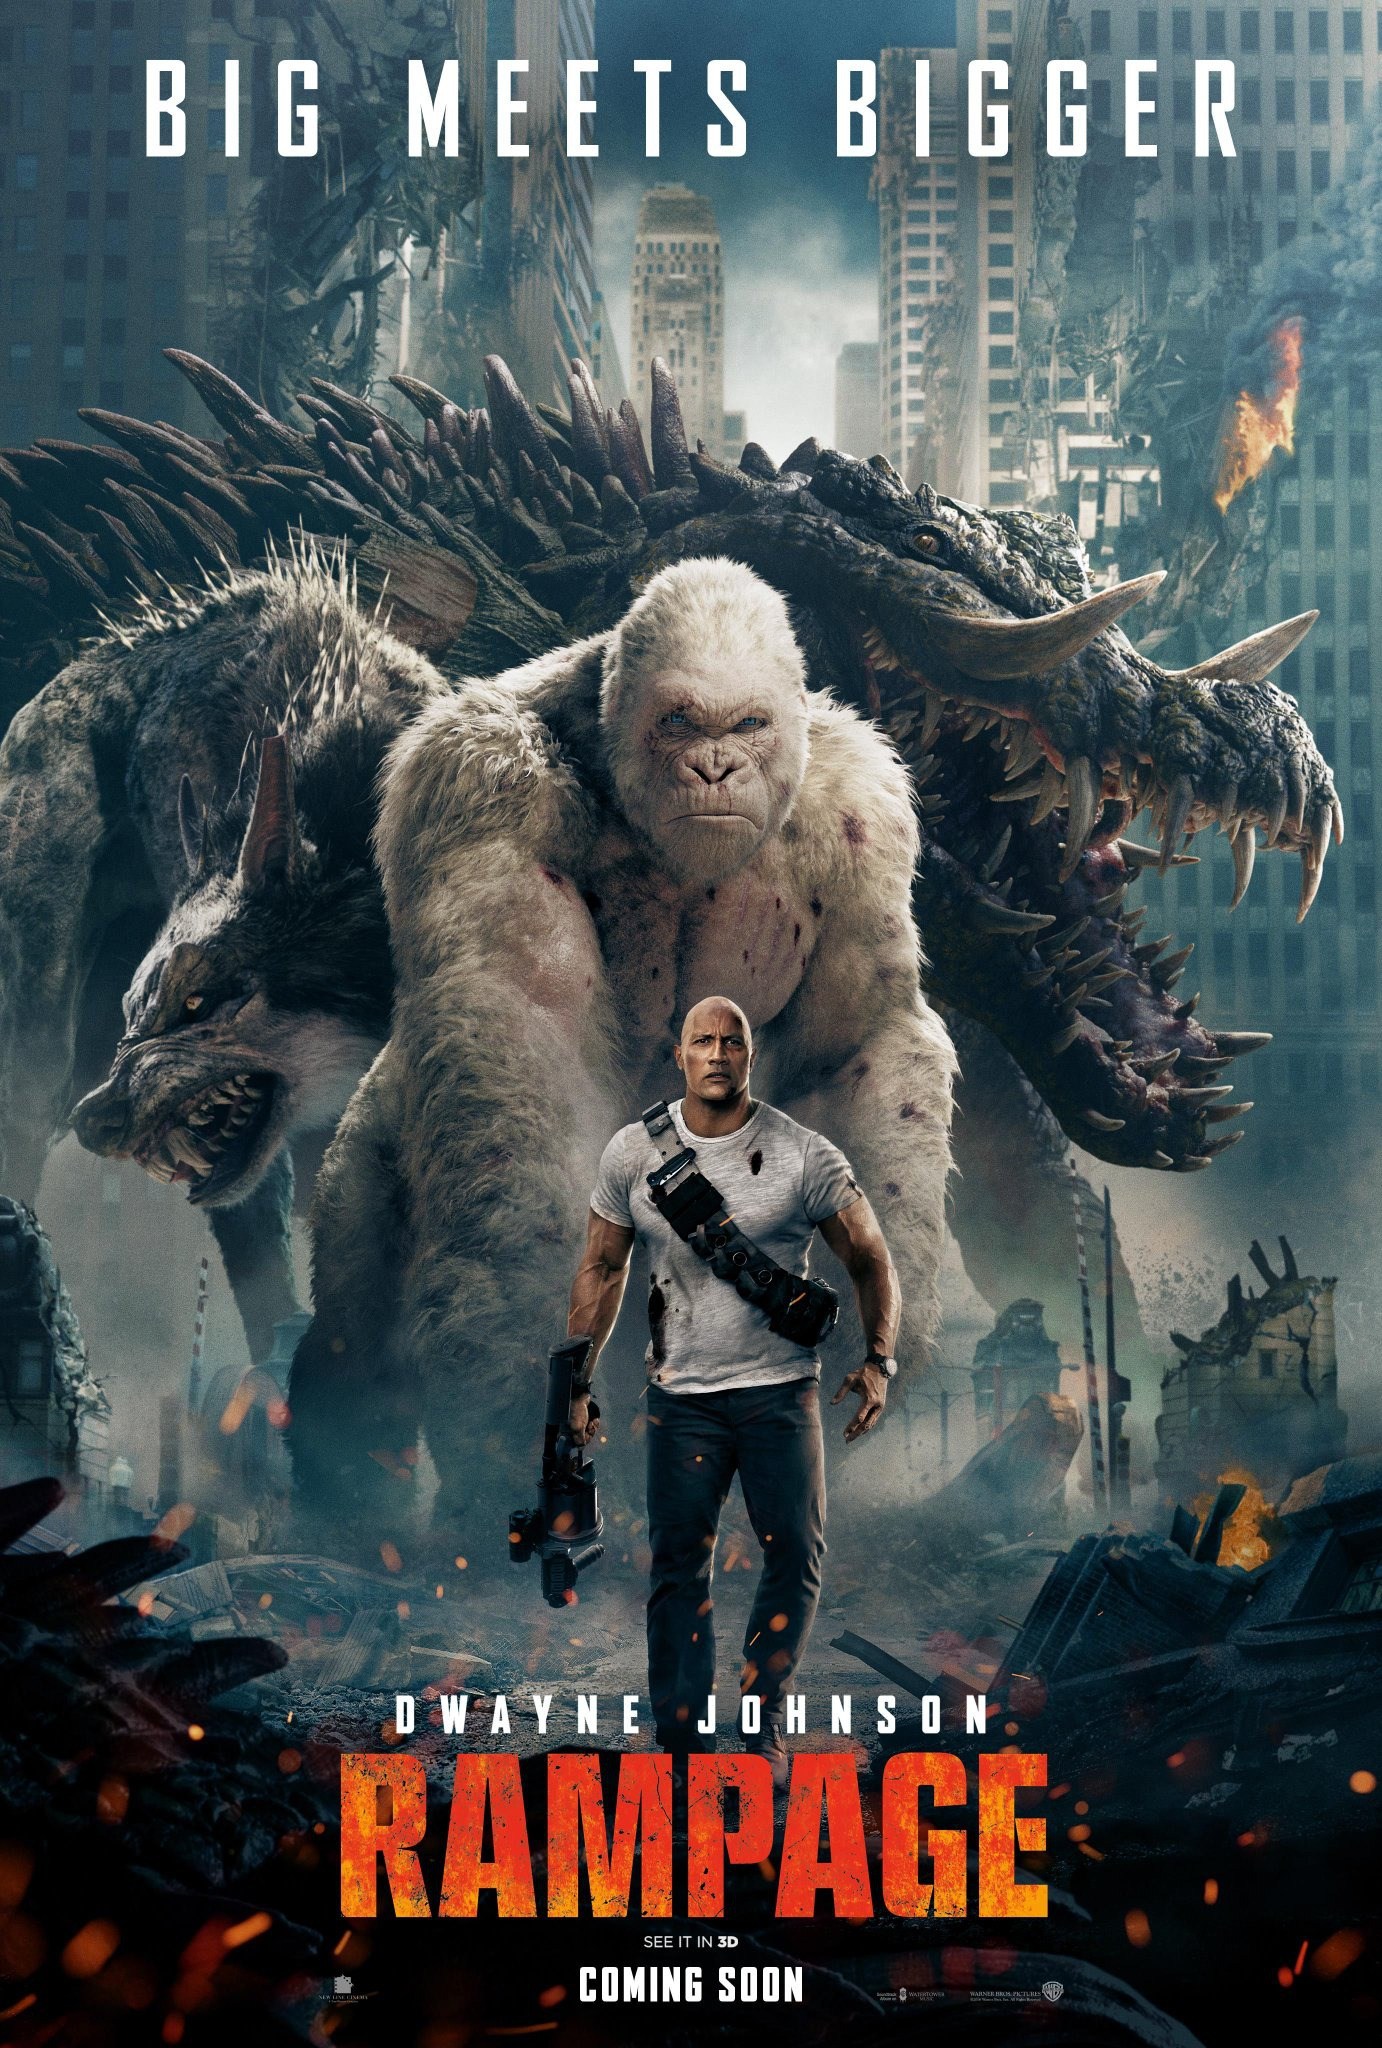 The Rampage Game Realistic Movie We Got Is Good Kaiju Action